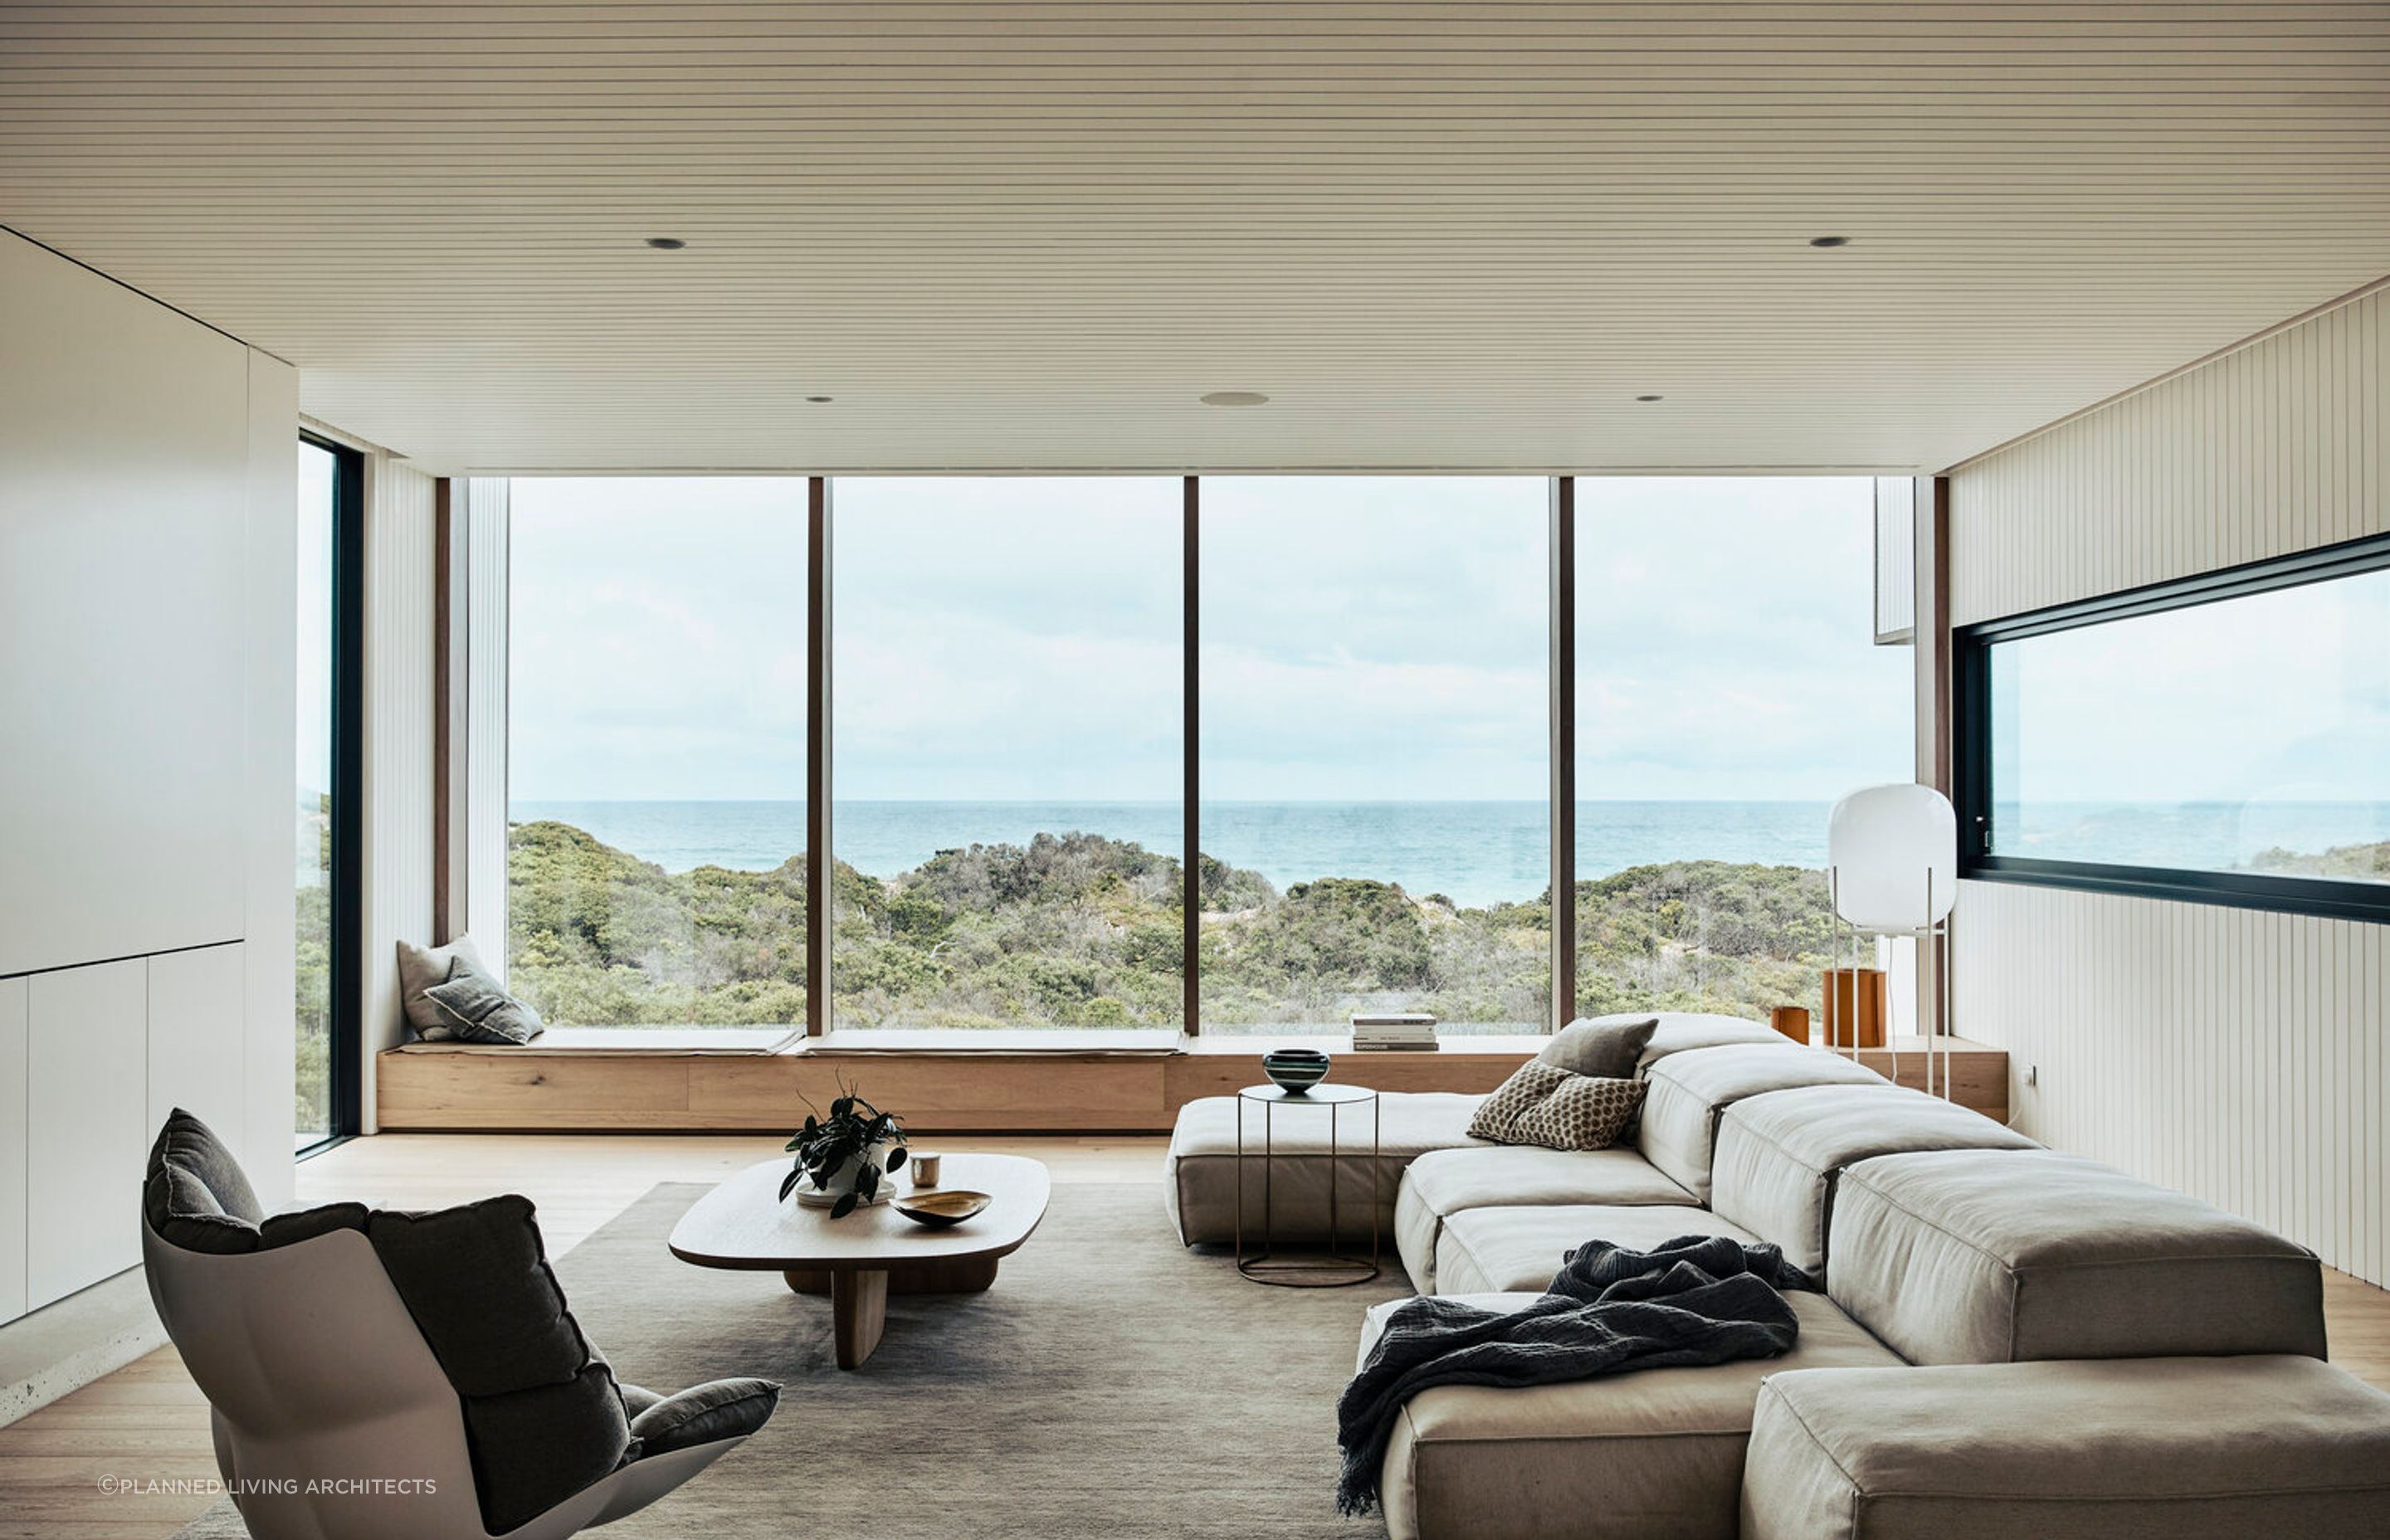 The stunning living room provides picturesque views of the surrounding sand dunes. Photography: Derek Swalwell.